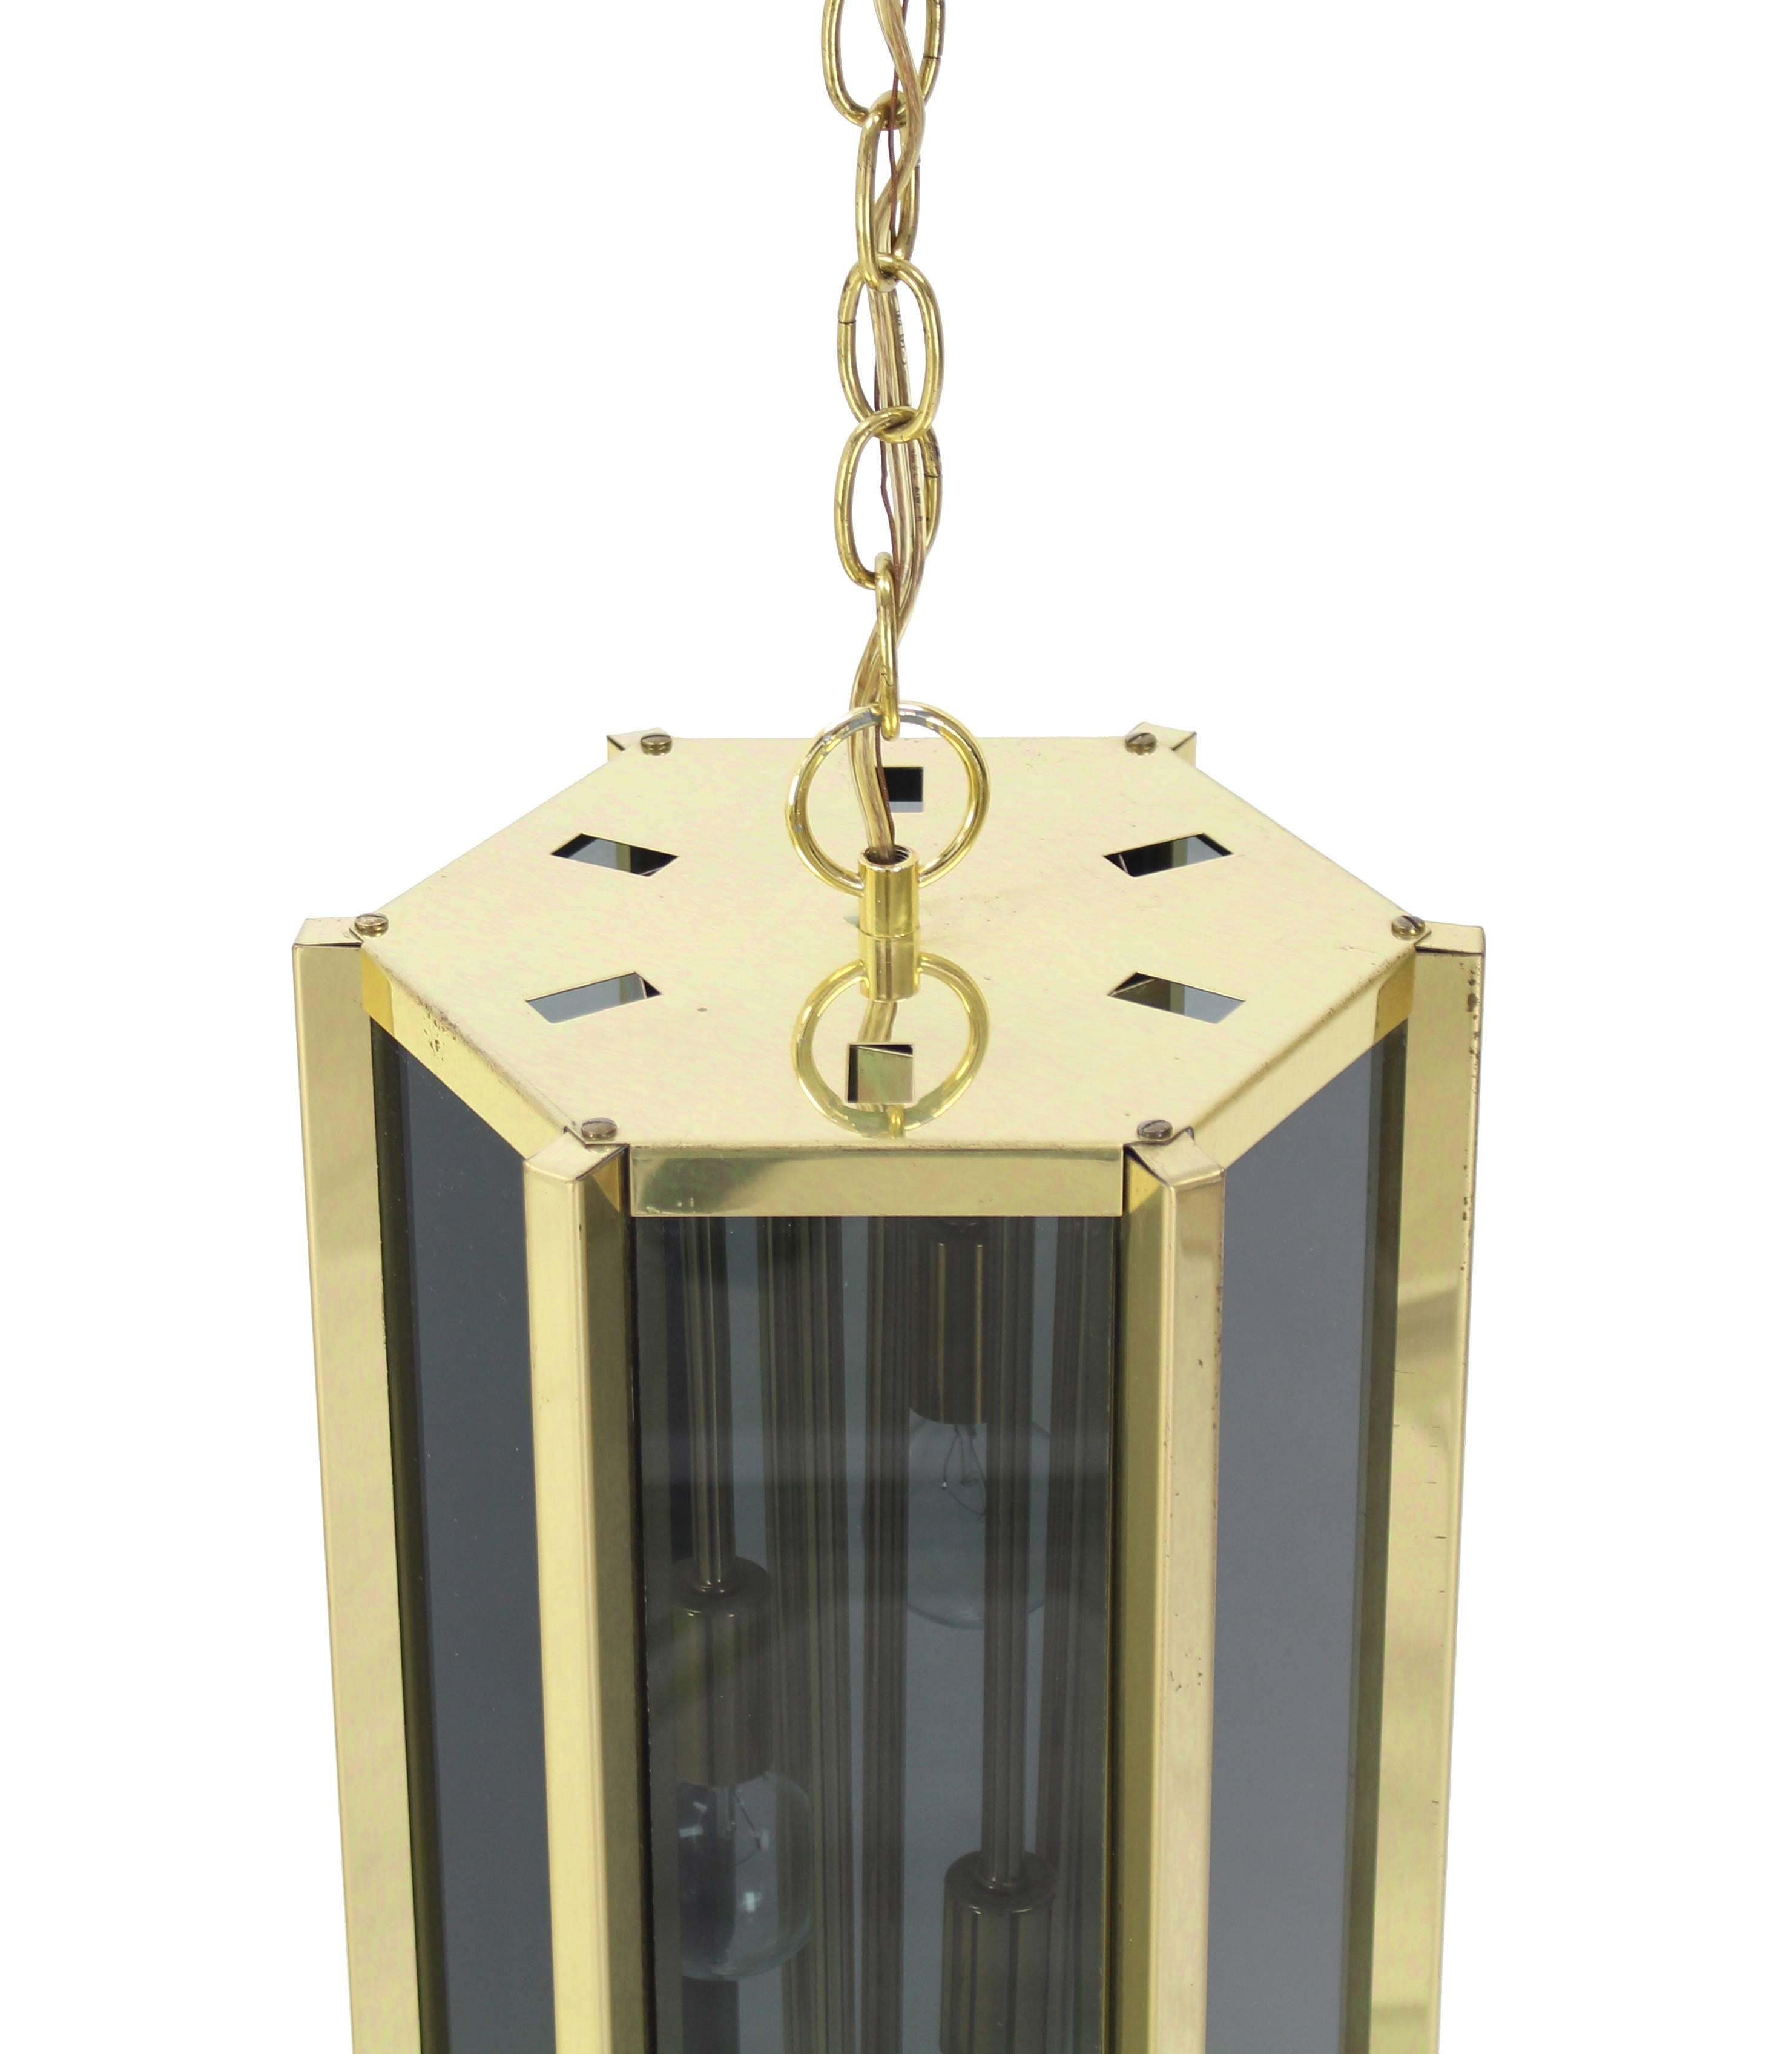 Tall and Narrow Smoked Glass and Brass Pendant Light Fixture In Excellent Condition For Sale In Rockaway, NJ